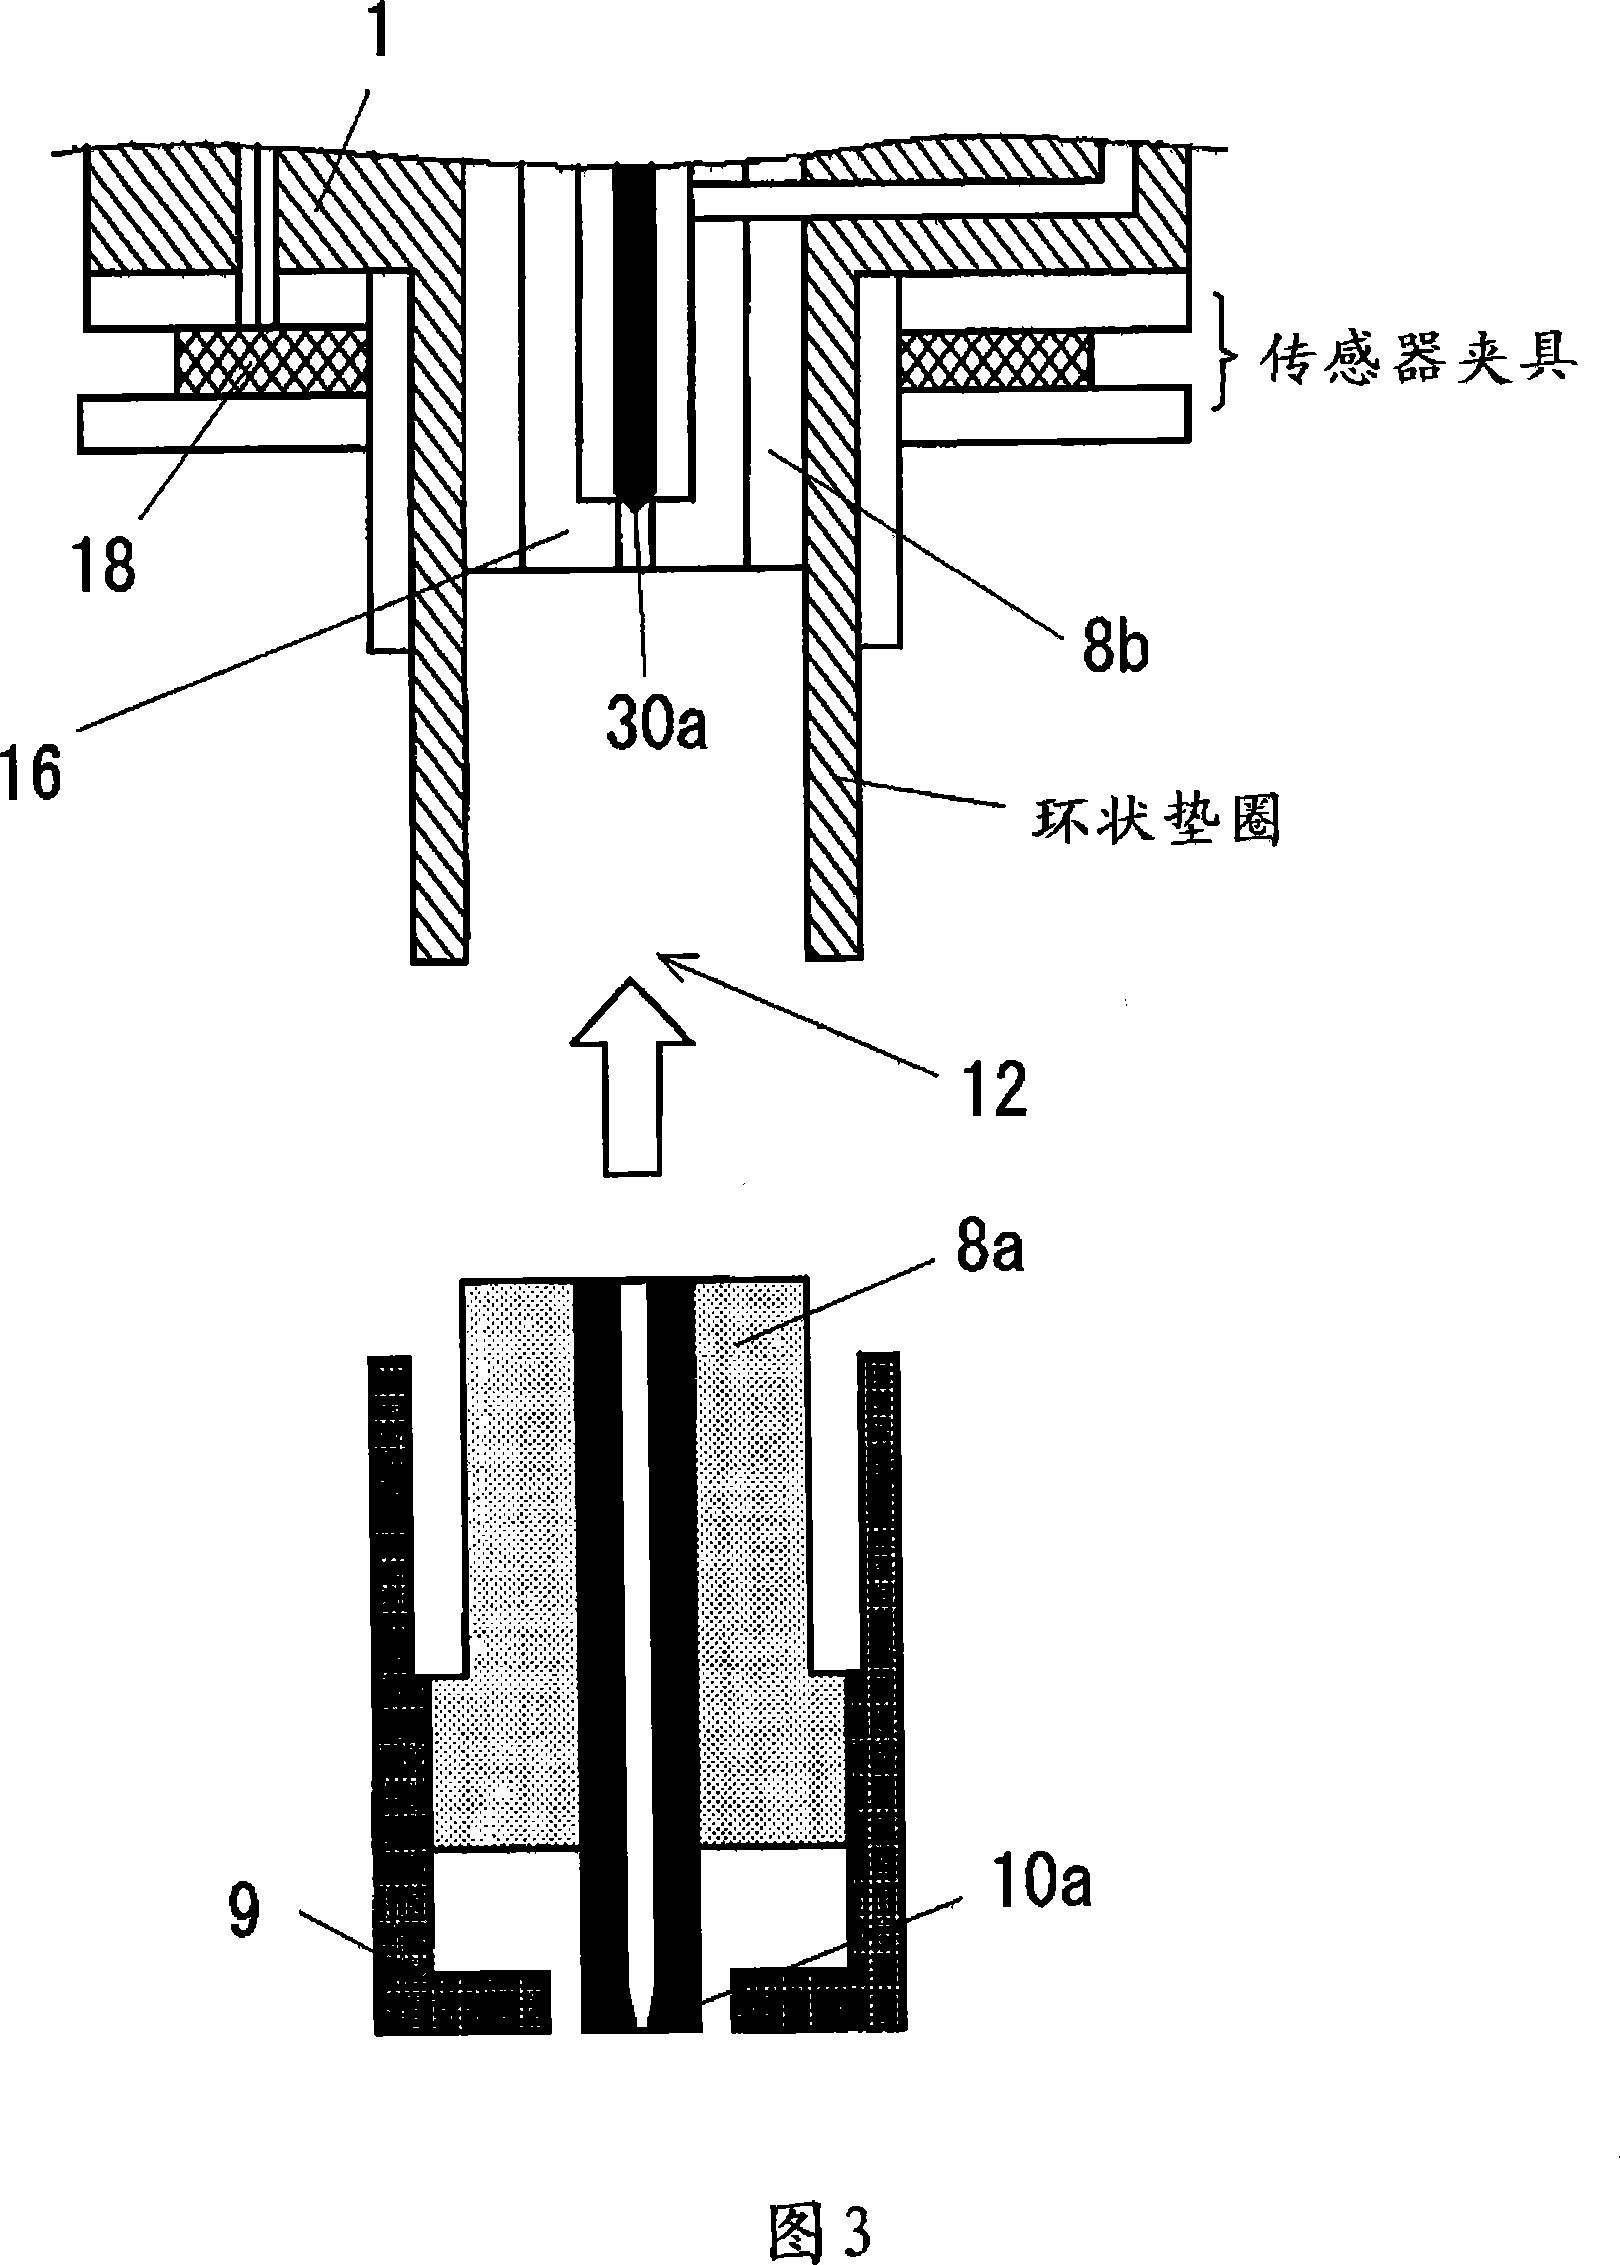 Multifunction ignition device integrated with spark plug